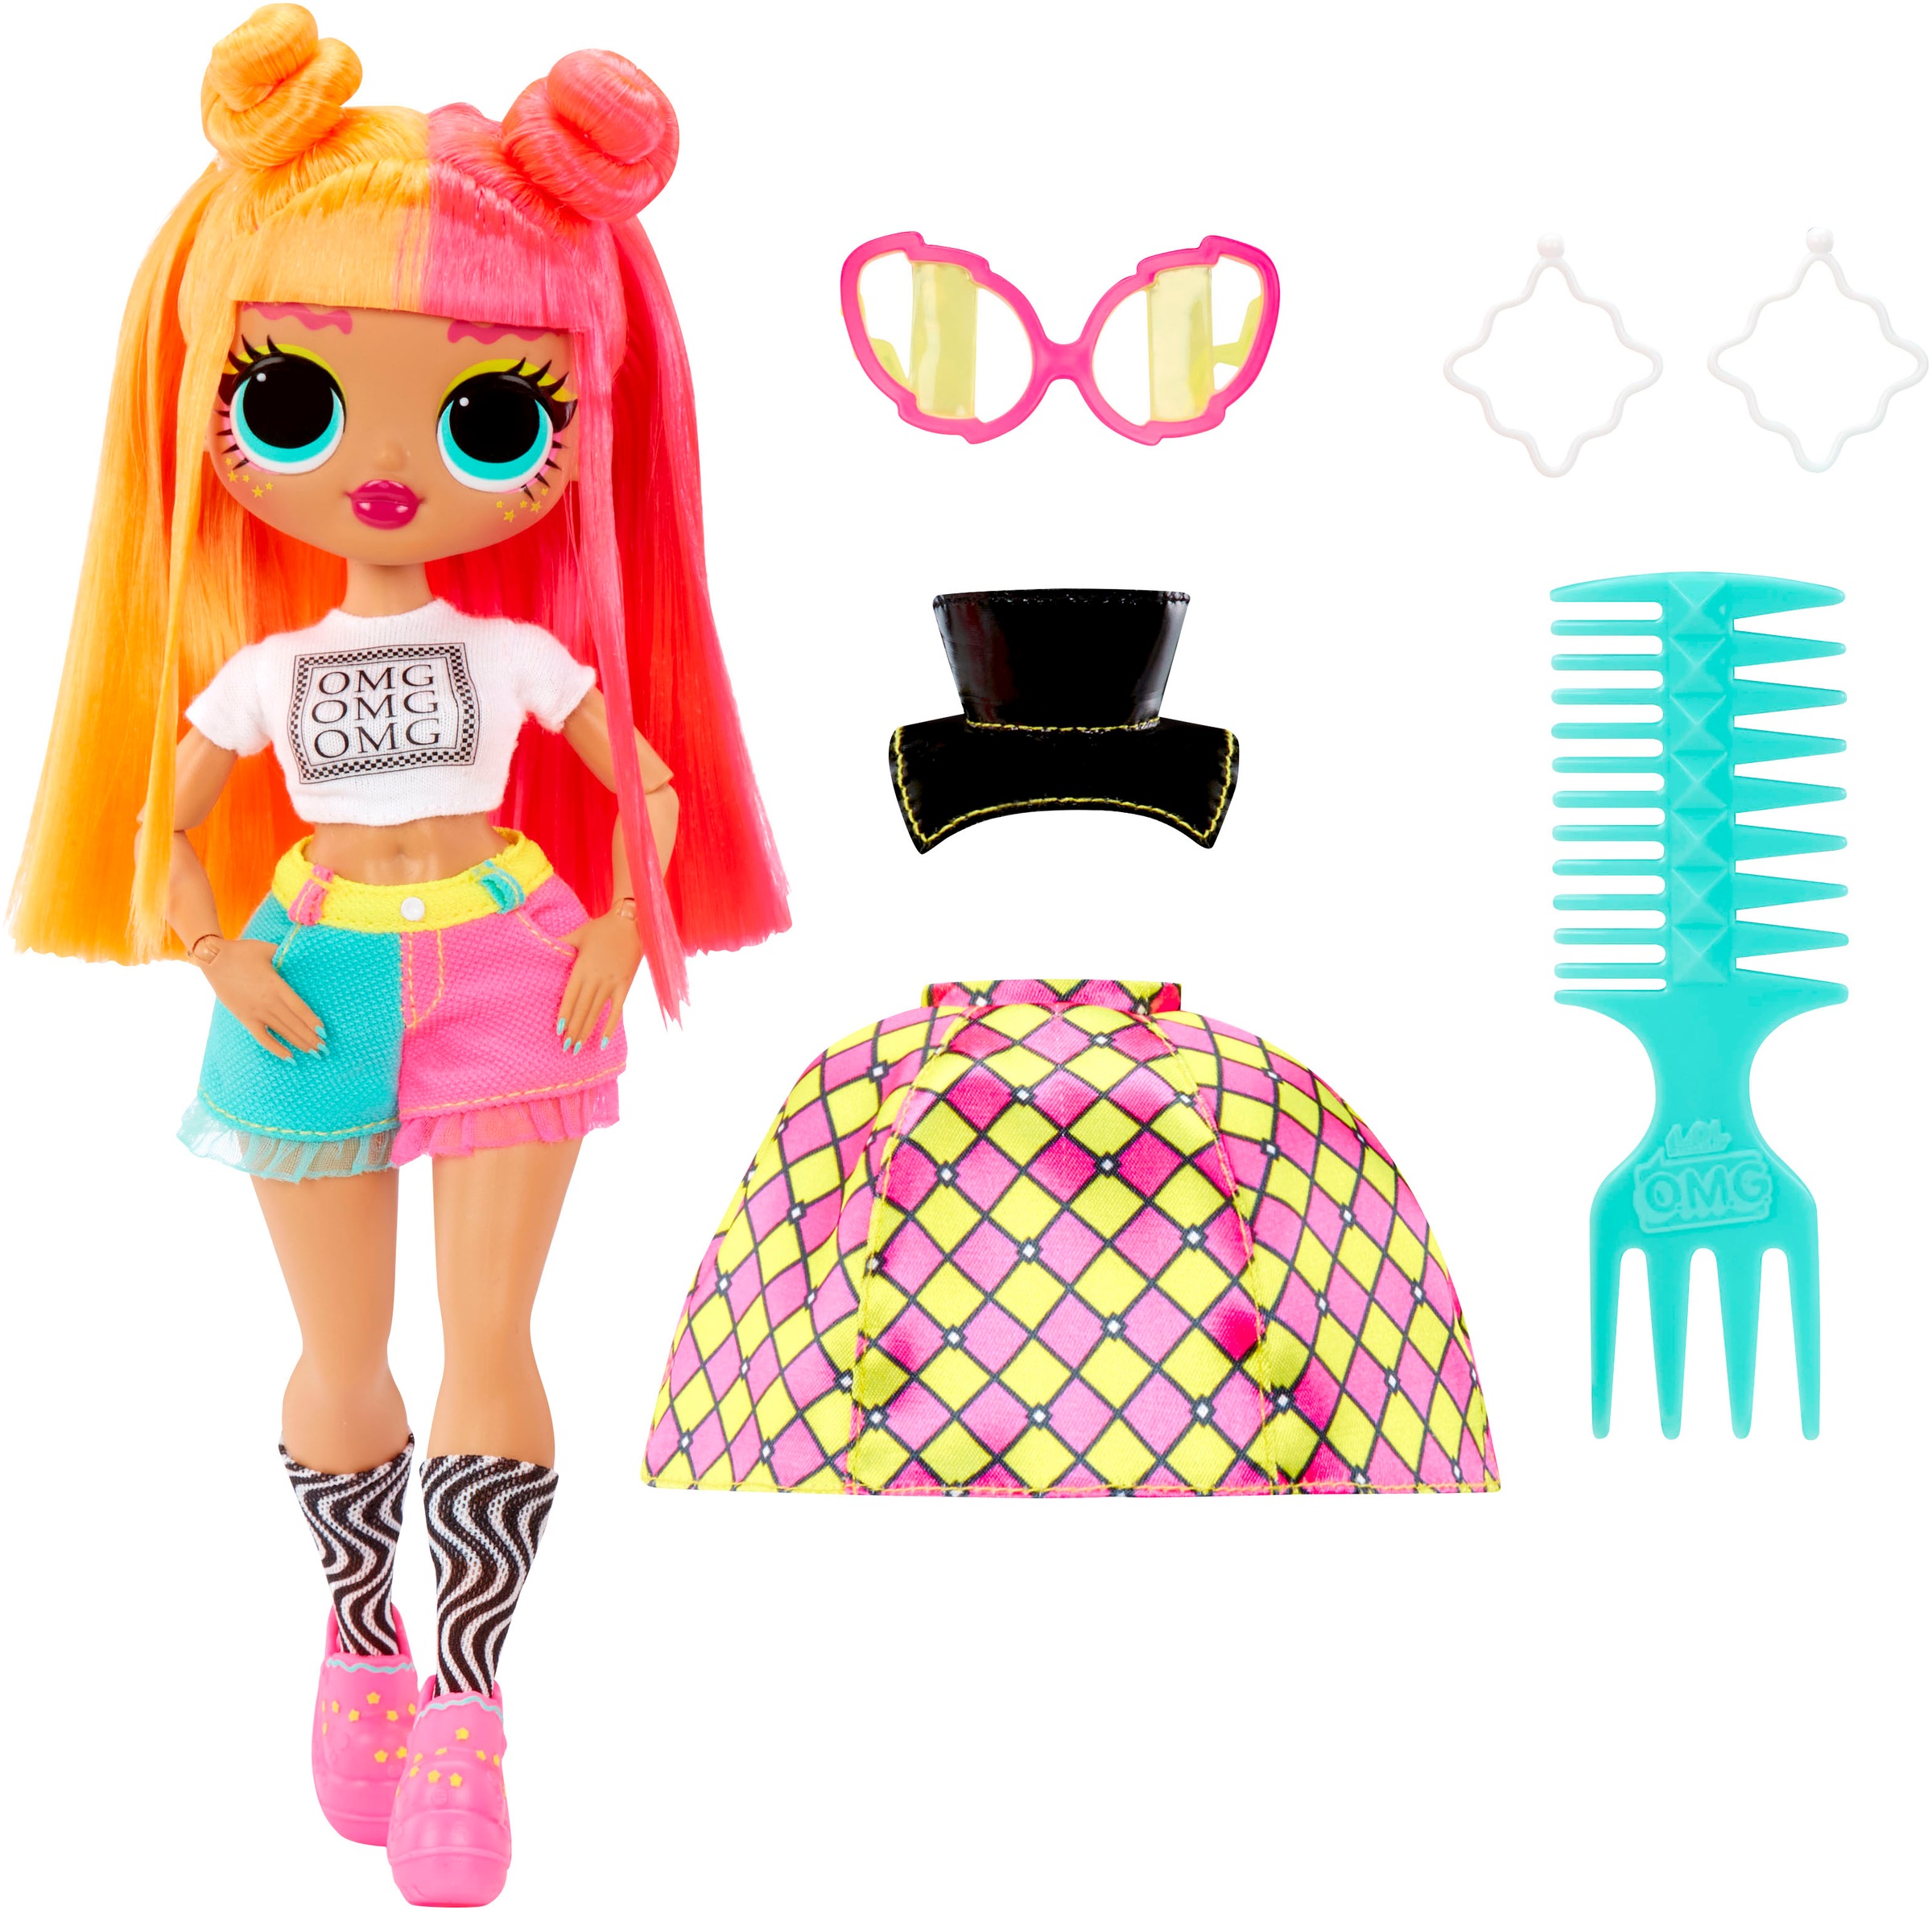 L.O.L. SURPRISE! Anziehpuppe »L.O.L. Surprise OMG HoS Doll - Neonlicious«